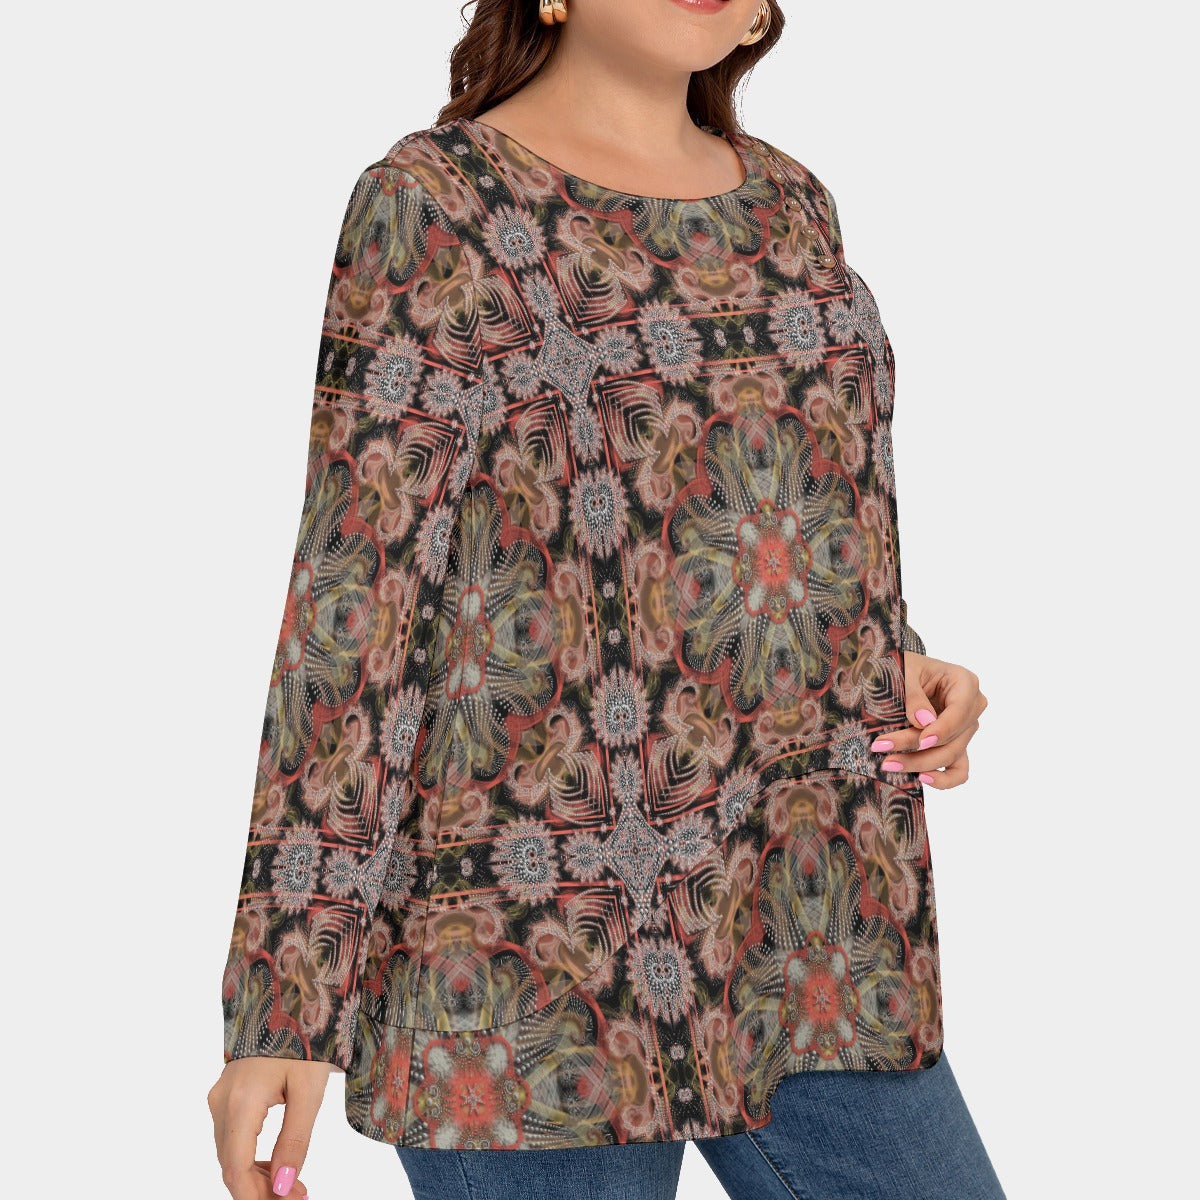 Elegance Enhanced O-Neck: Plus Size Tee with Chic Buttons